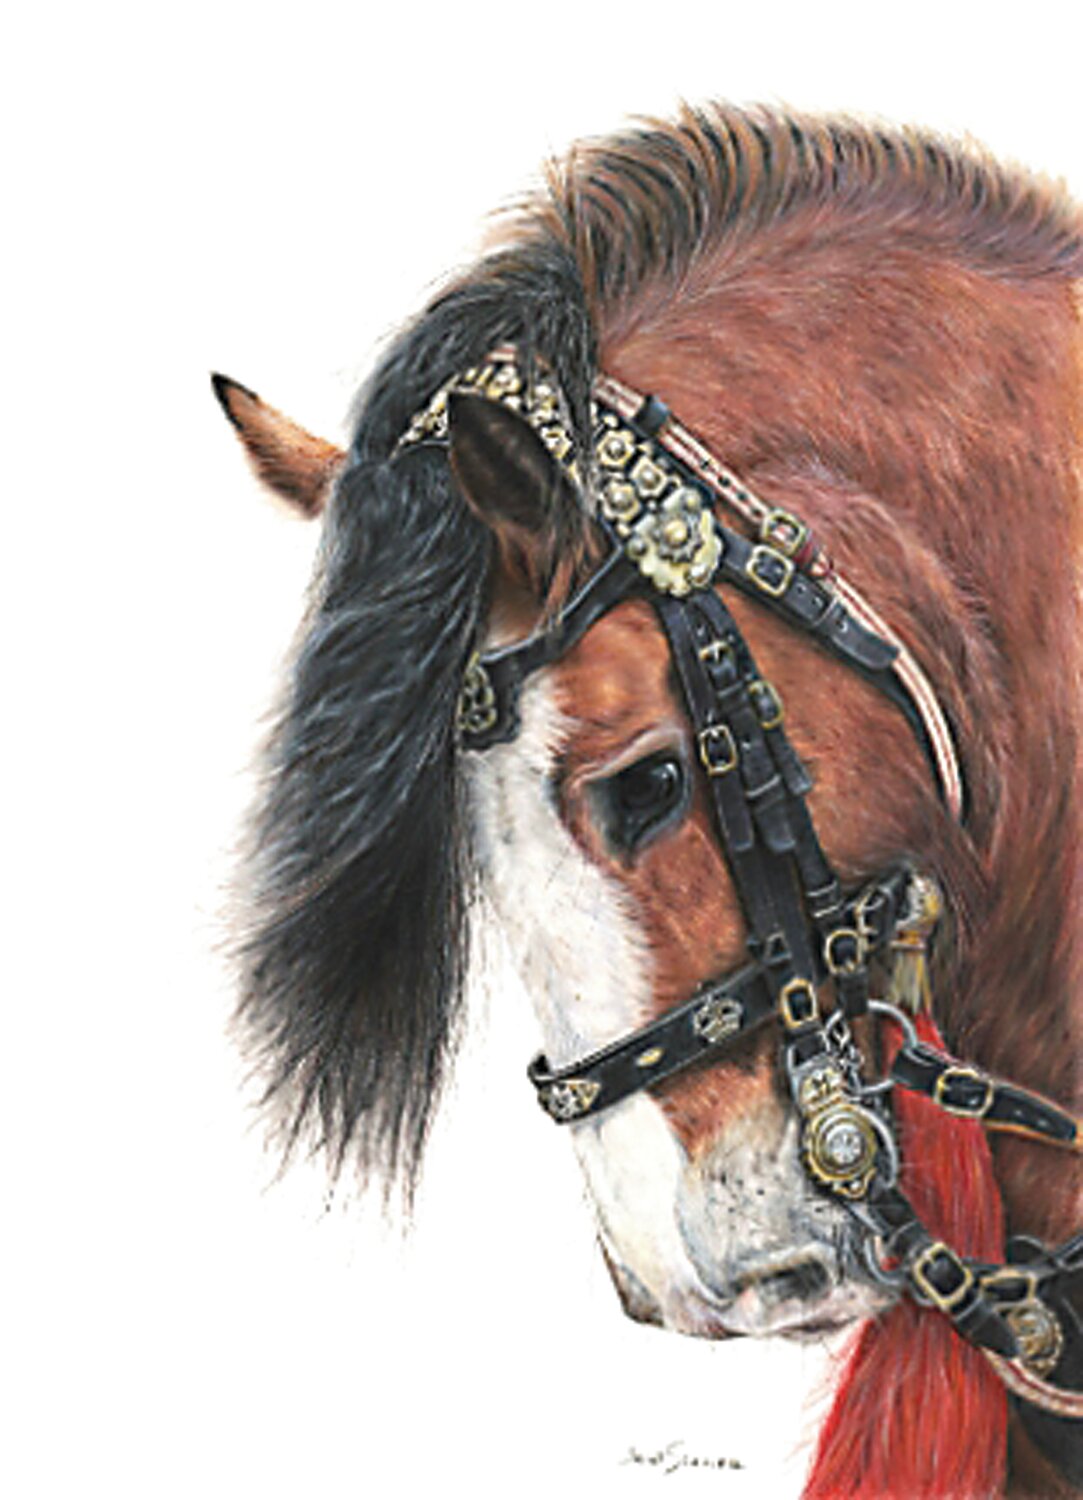 Janet Schuler’s “Perseus,” a work in colored pencil, was awarded first place in the “R.E.D. Show” People’s Choice contest and a runner-up in the show’s Artists’ Choice contest.